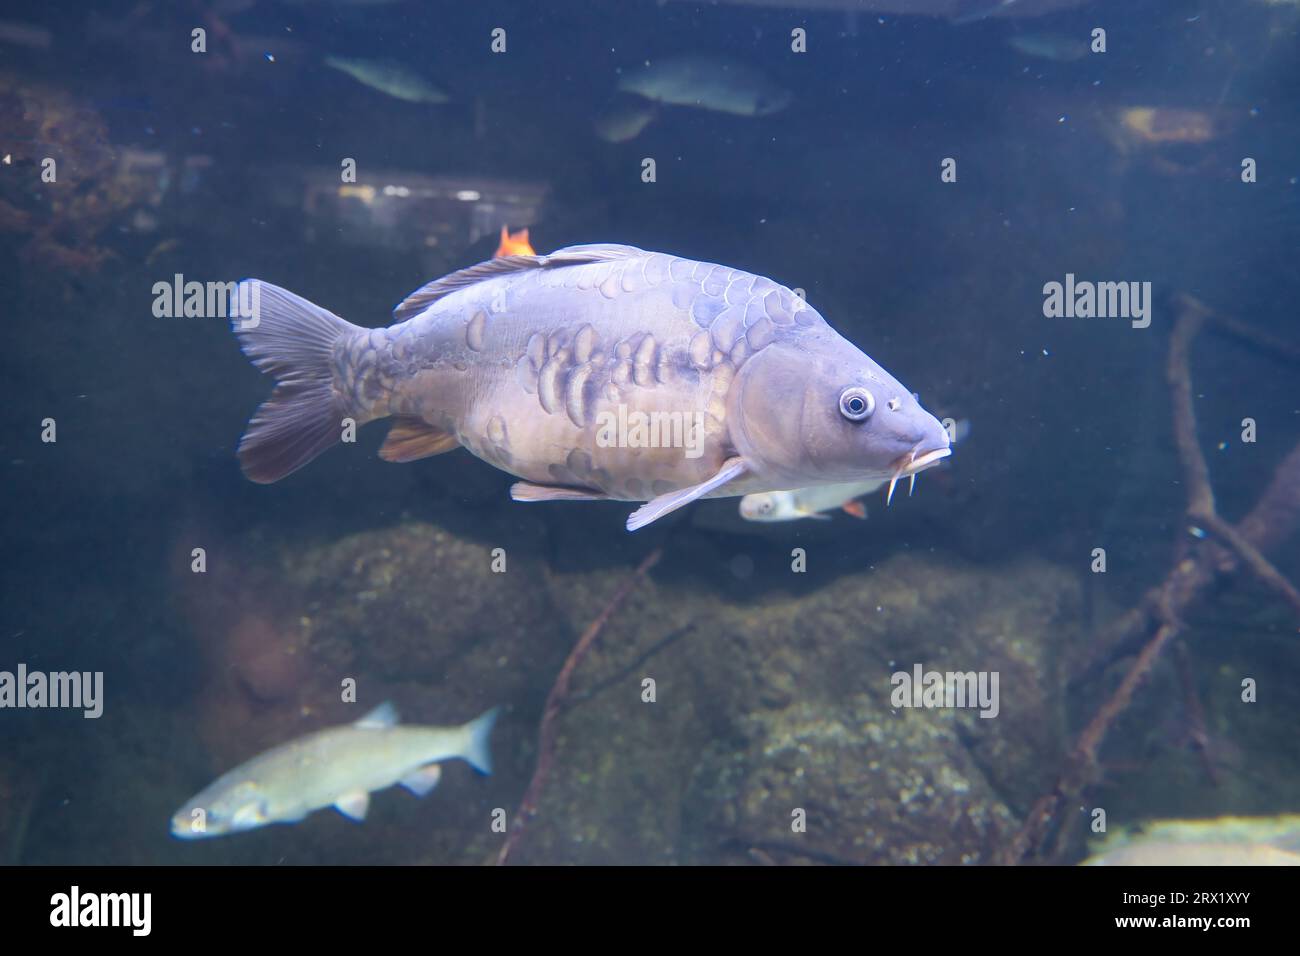 Paris Aquarium, The Eurasian carp or European carp, widely known as the common carp, is a widespread freshwater fish of eutrophic waters in lakes Stock Photo